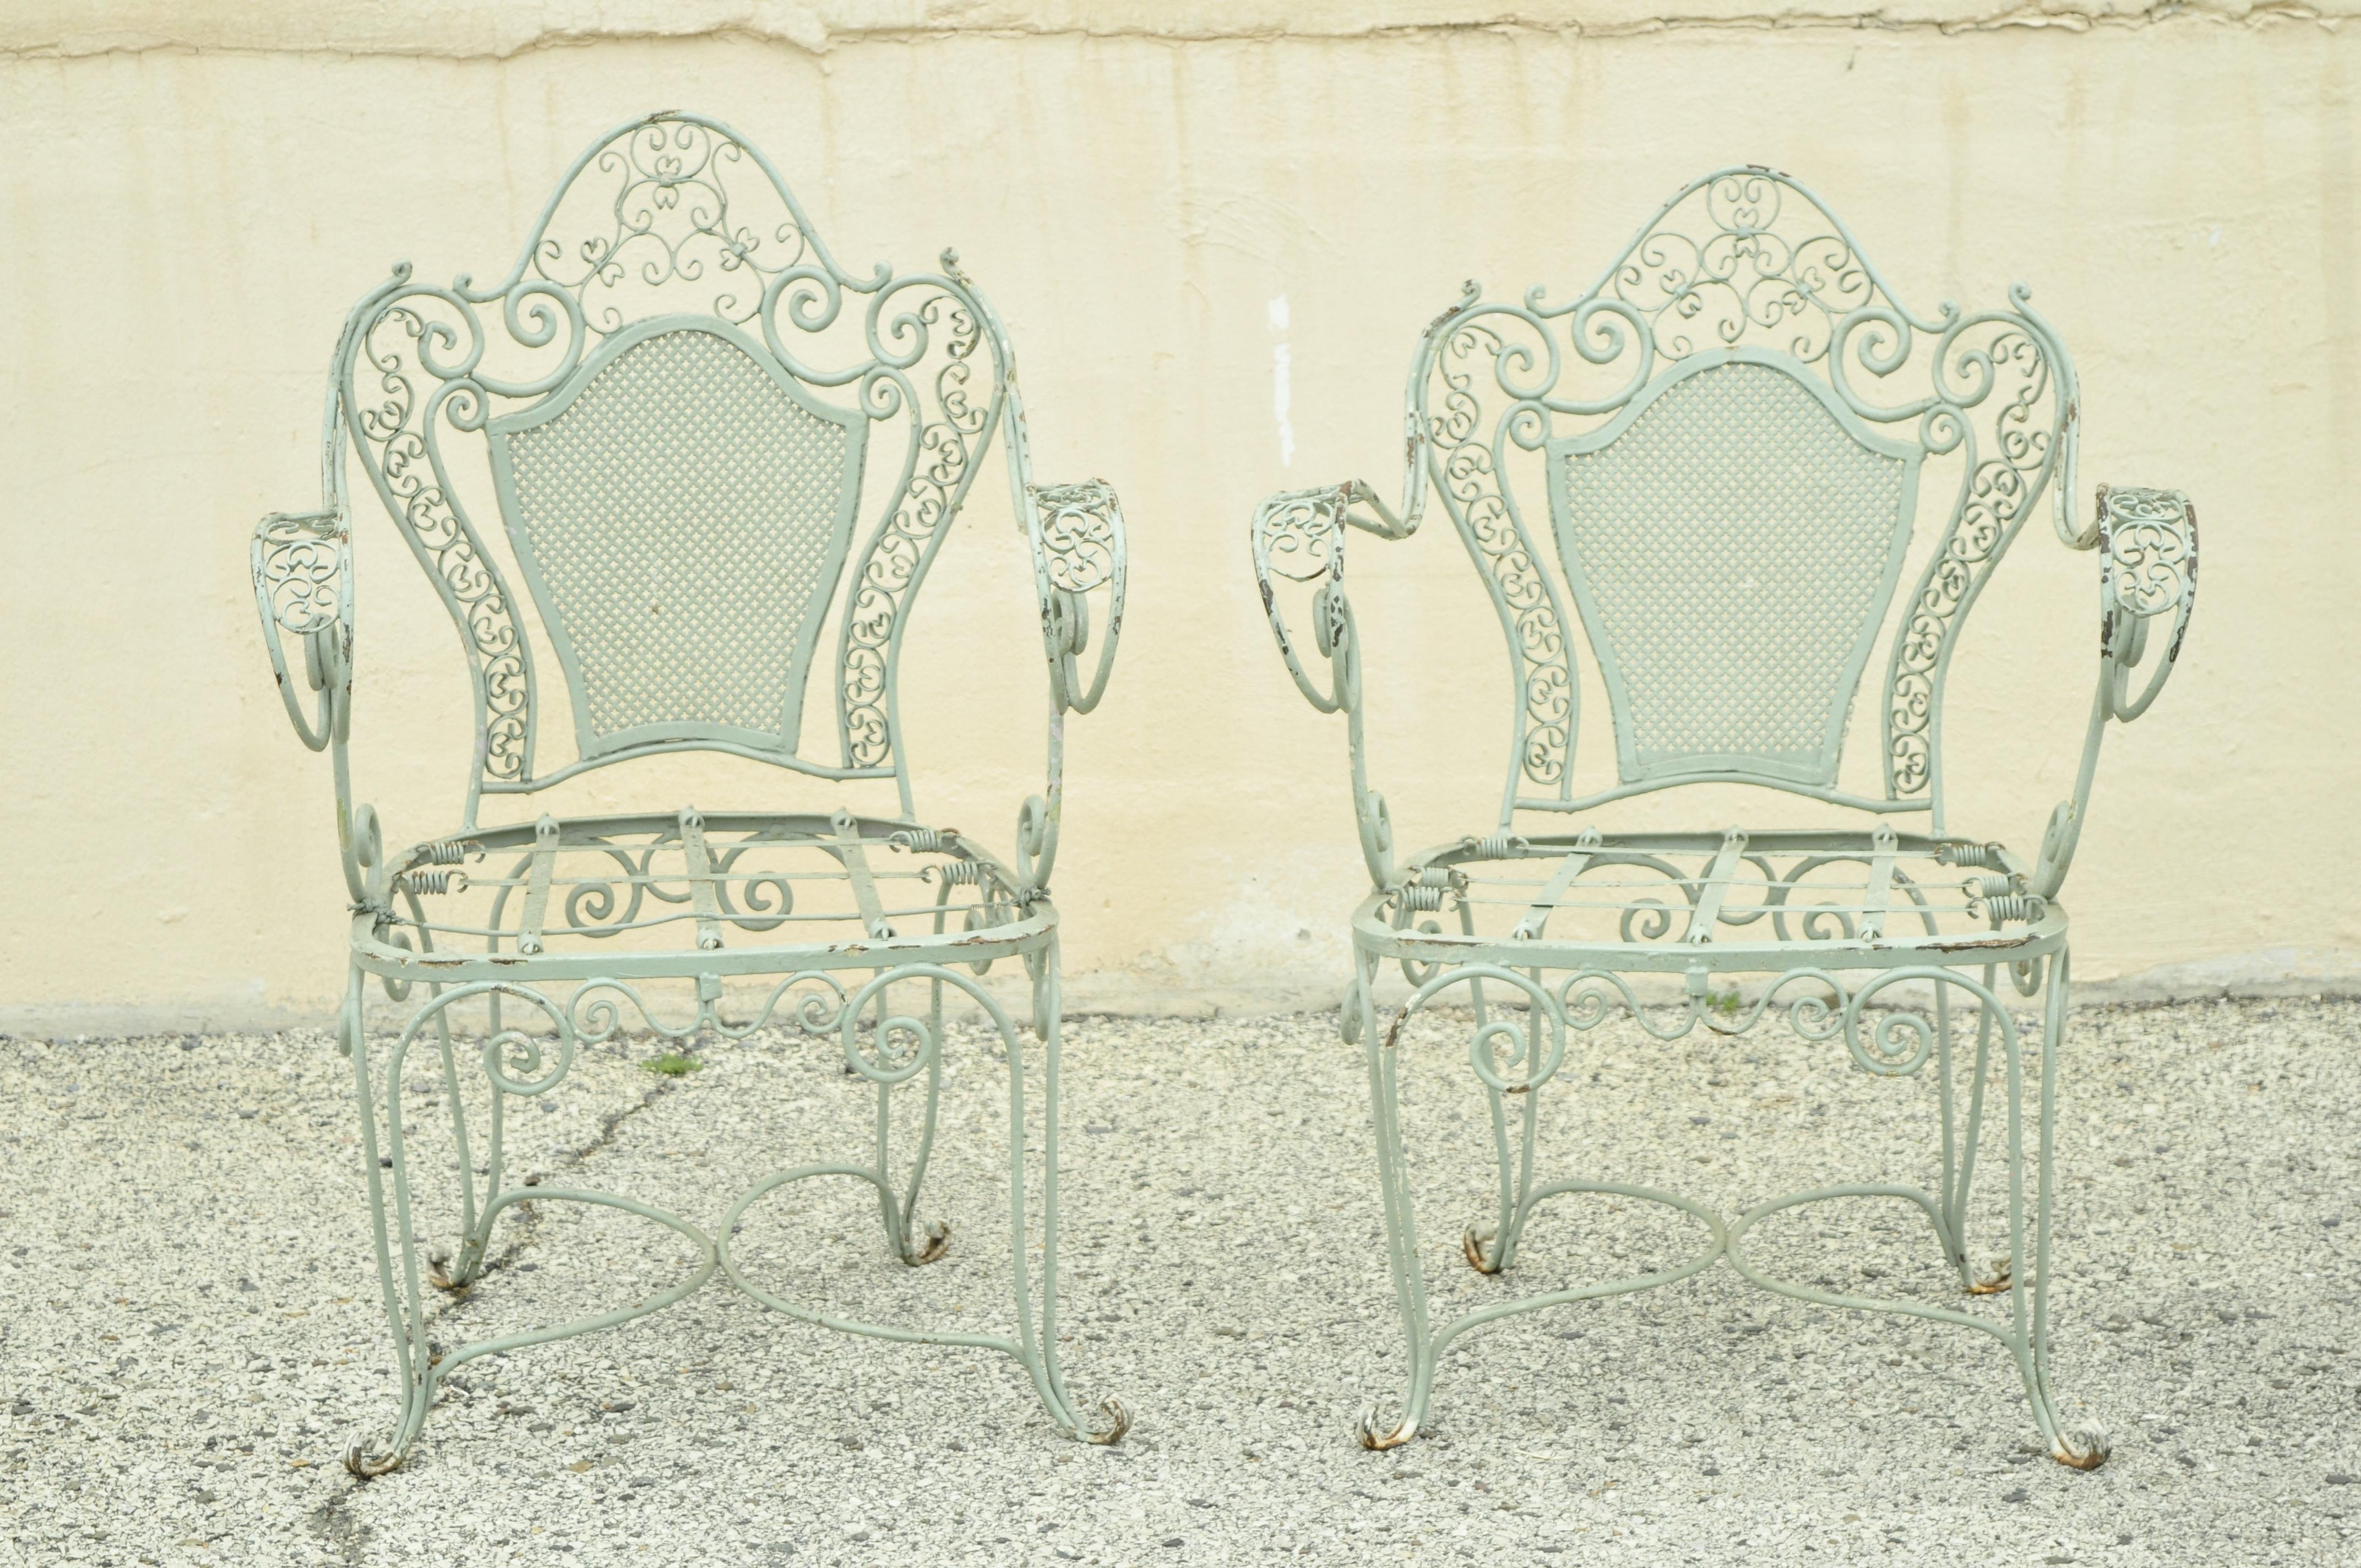 Vintage Salterini style green wrought iron scroll work garden patio arm chairs - a pair. Item features wrought iron construction, quality craftsmanship, great style and form. Believed to be Salterini but unconfirmed. Circa mid 20th century.